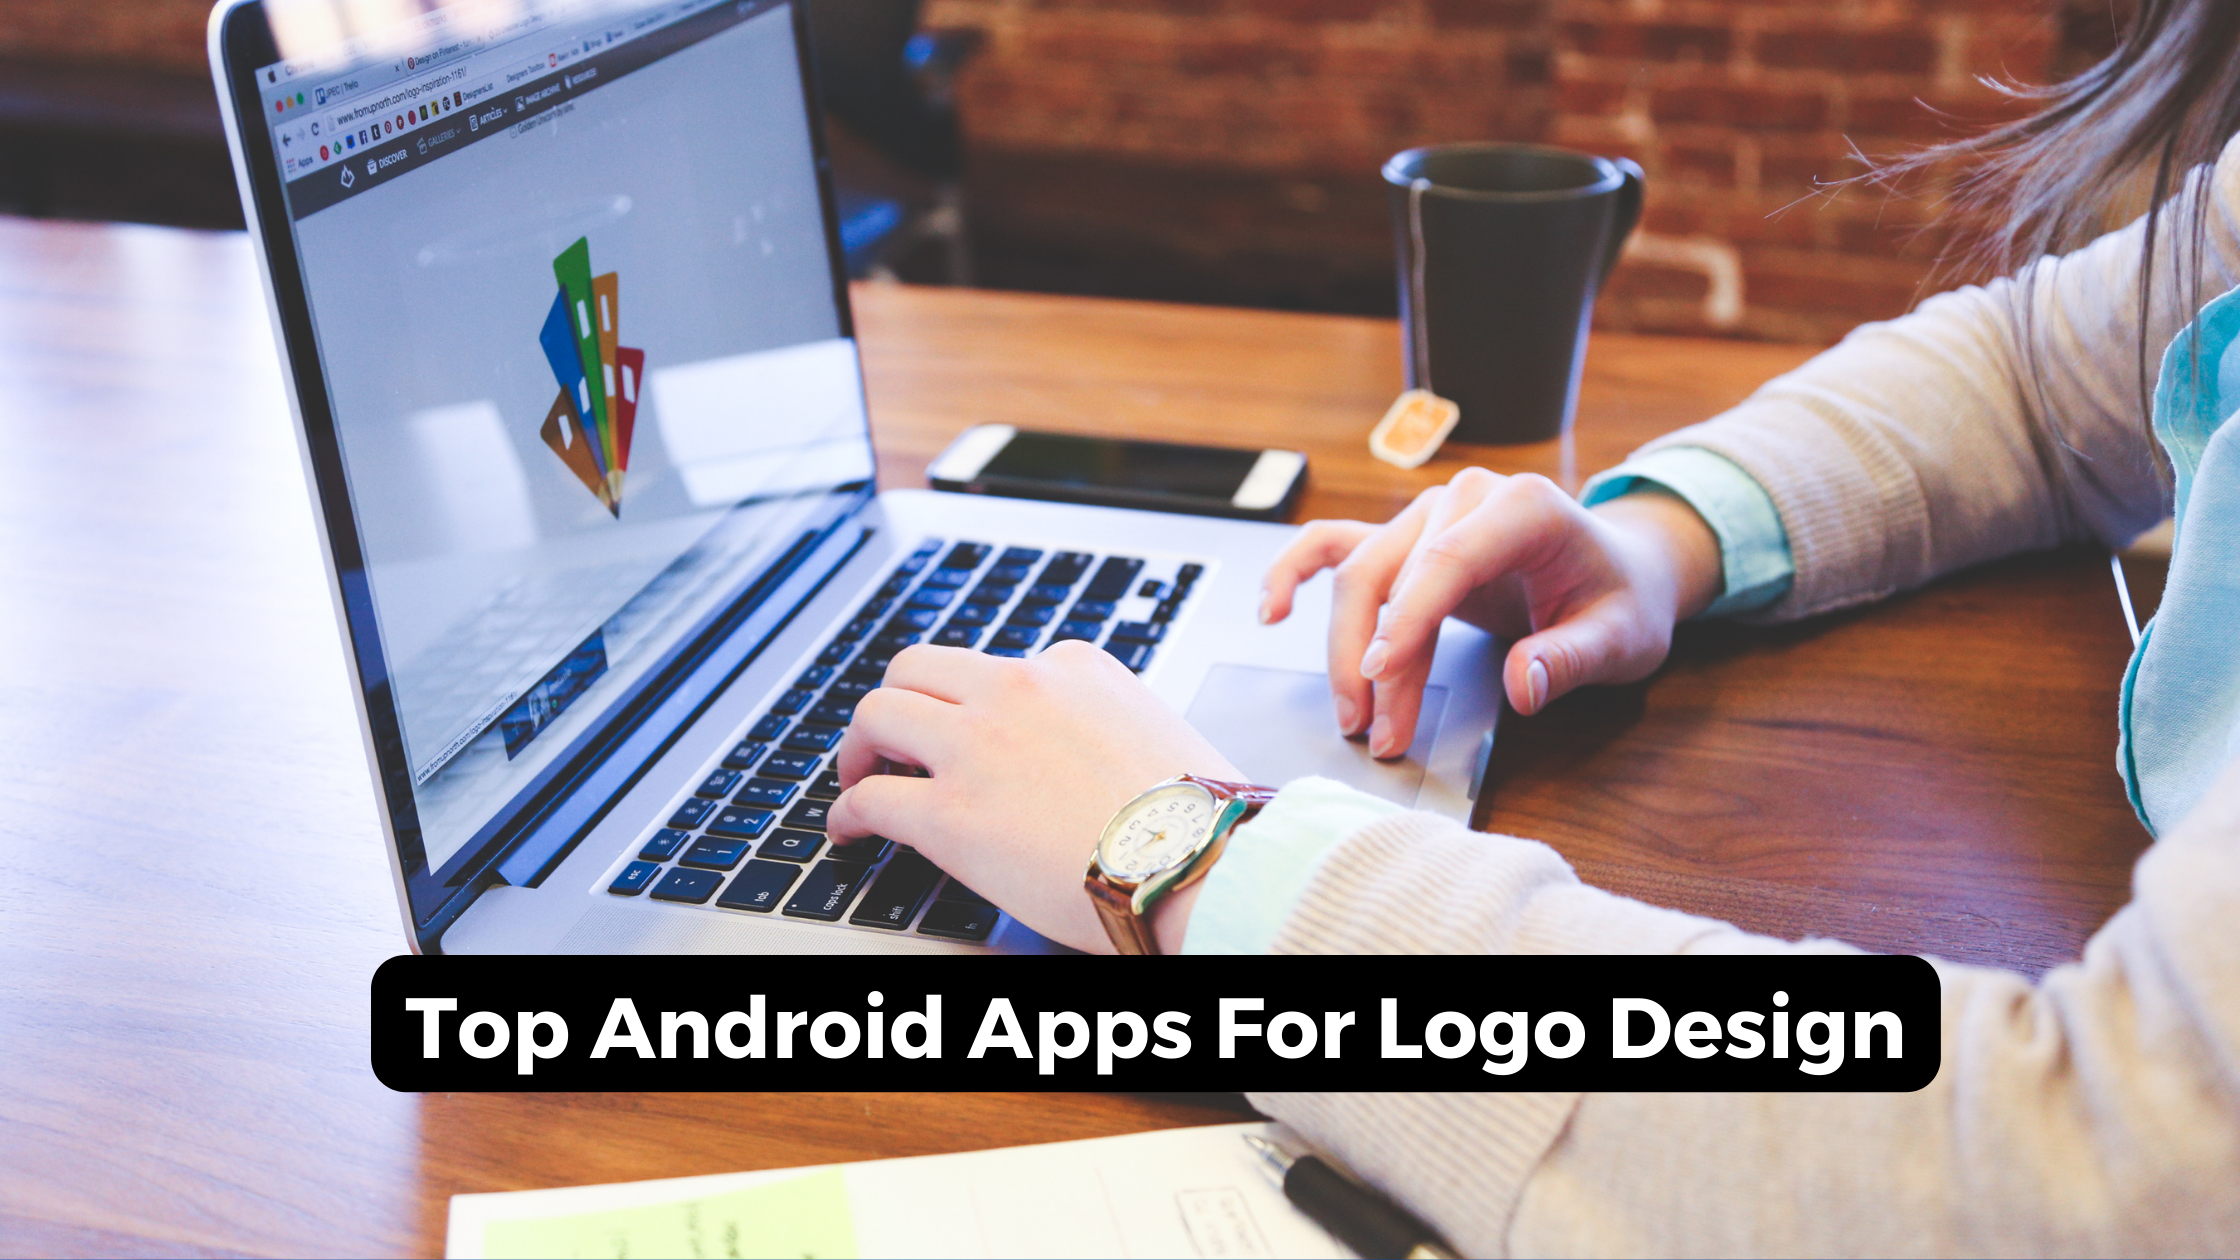 Top Android Apps For Logo Design